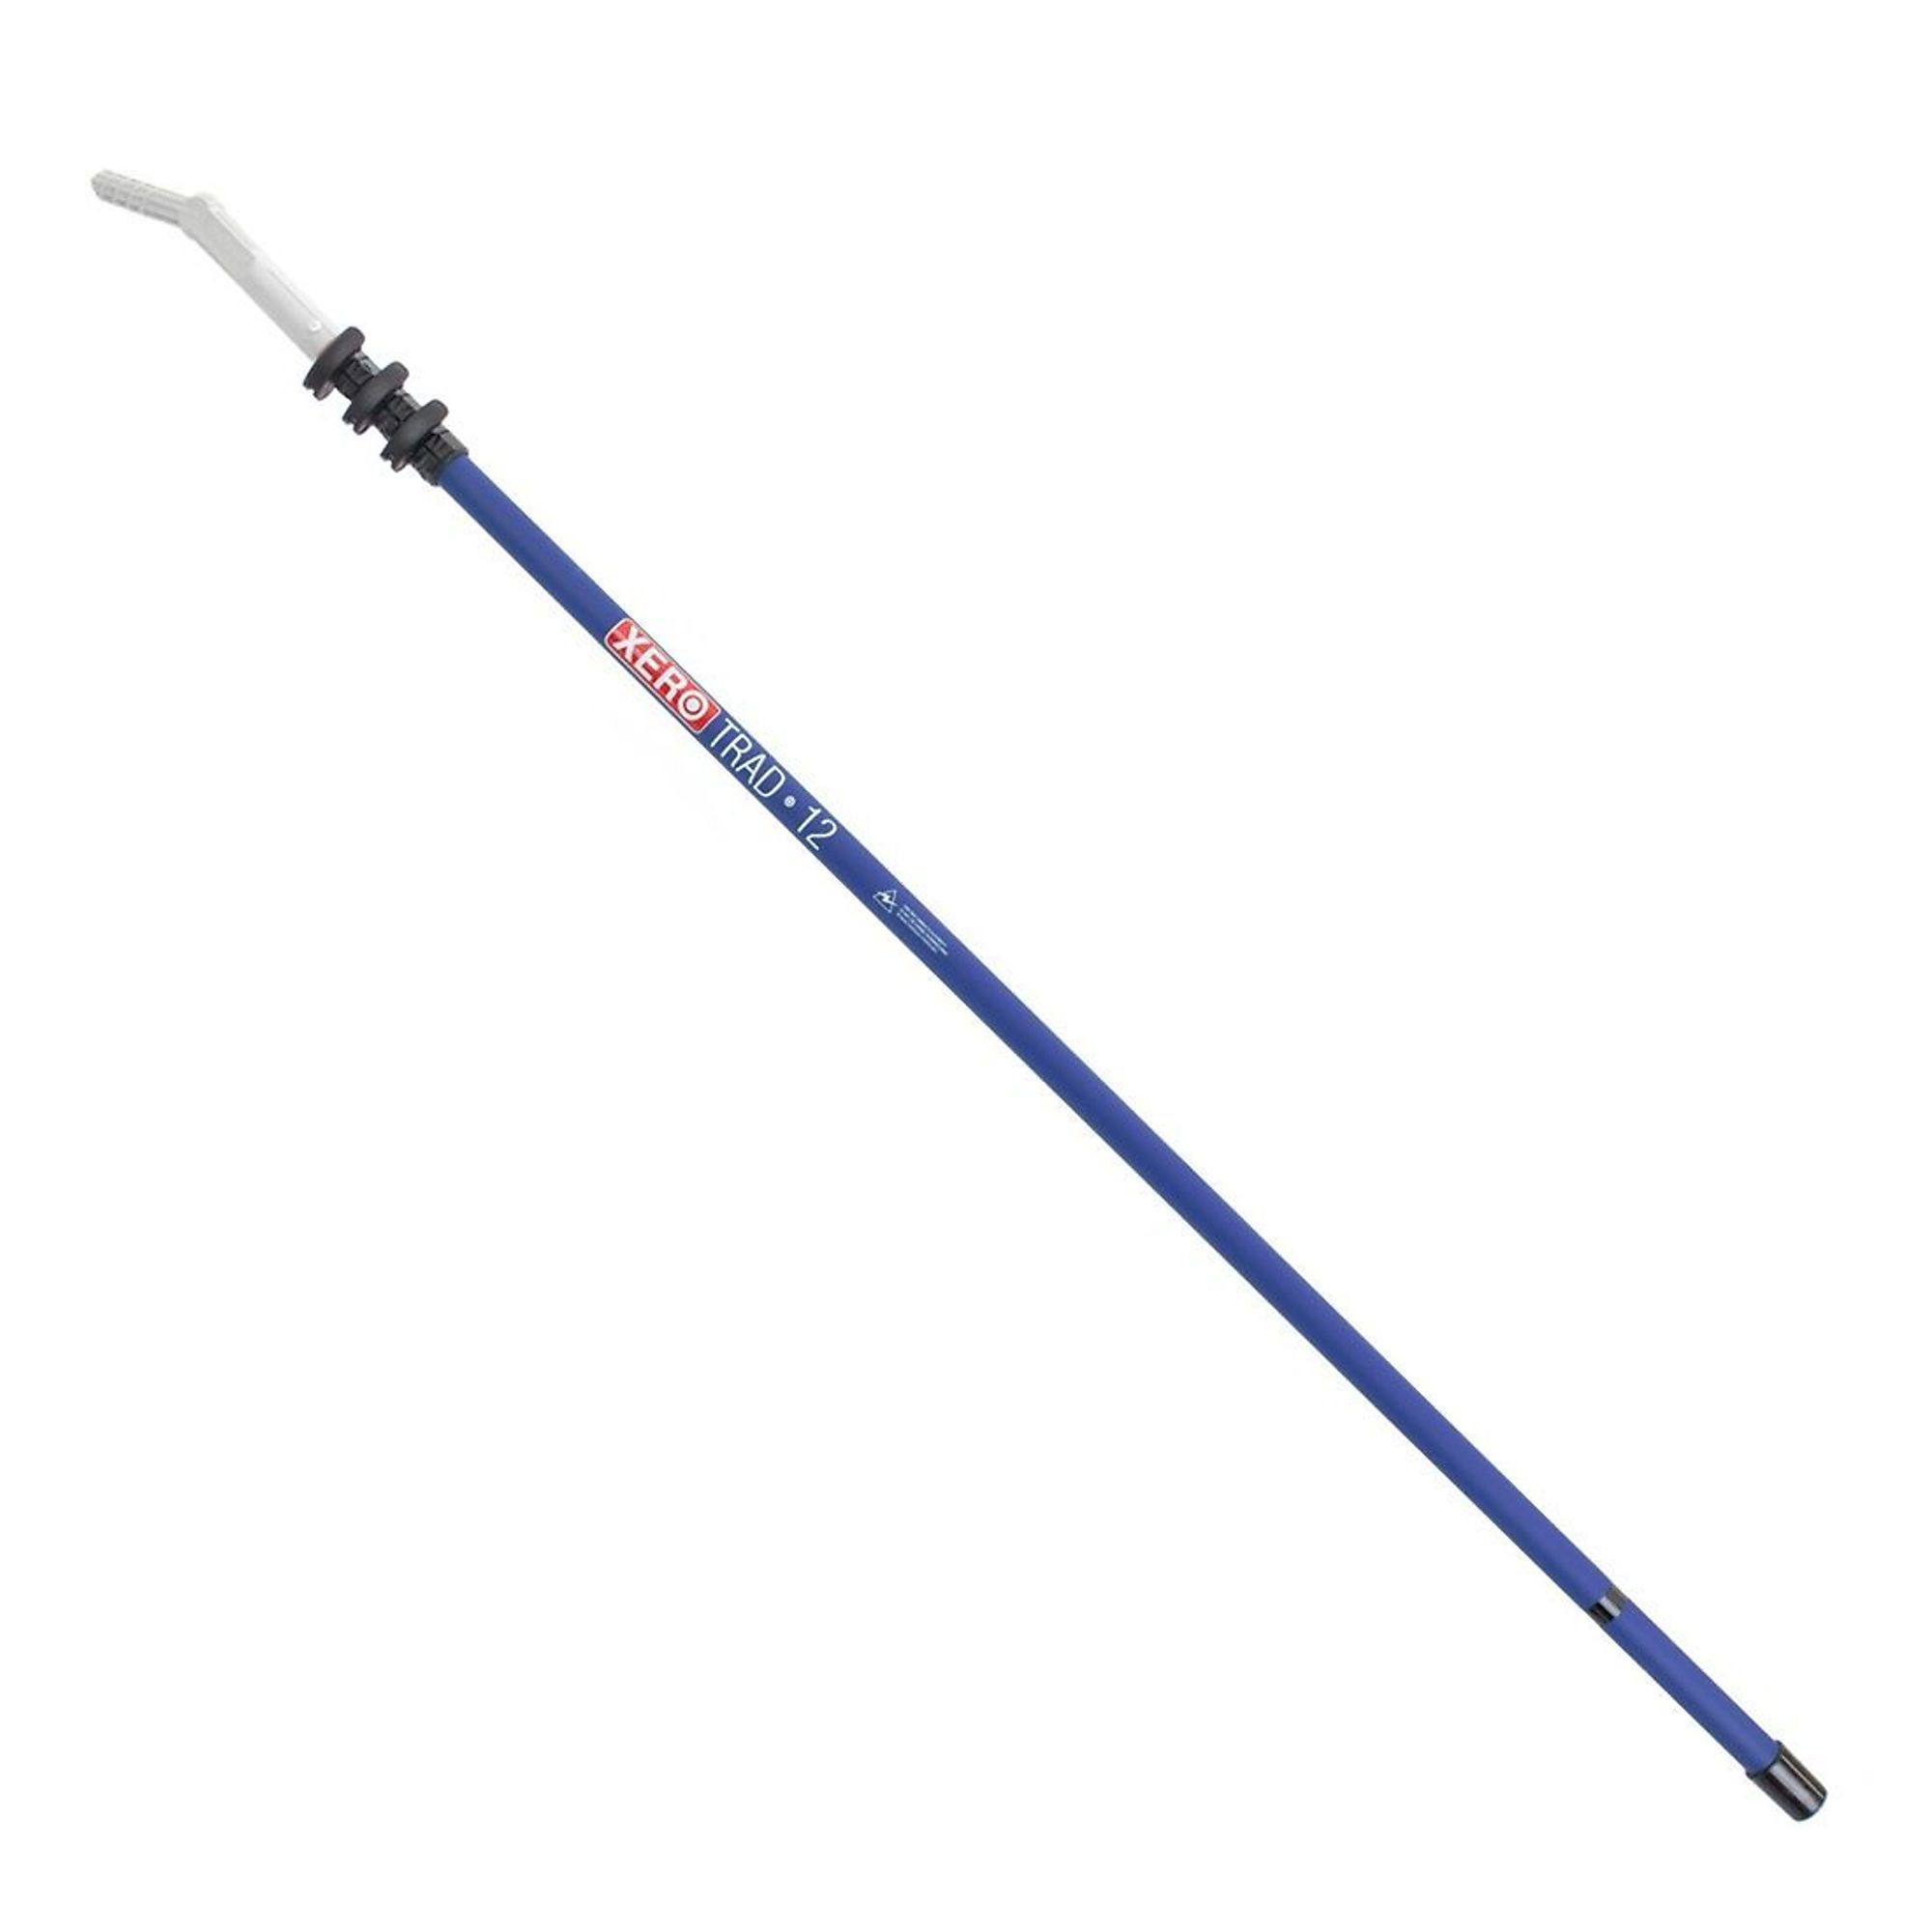 XERO, Trad Pole 2.0 Wagtail Tip - Blue 12ft., Model 209-20-408